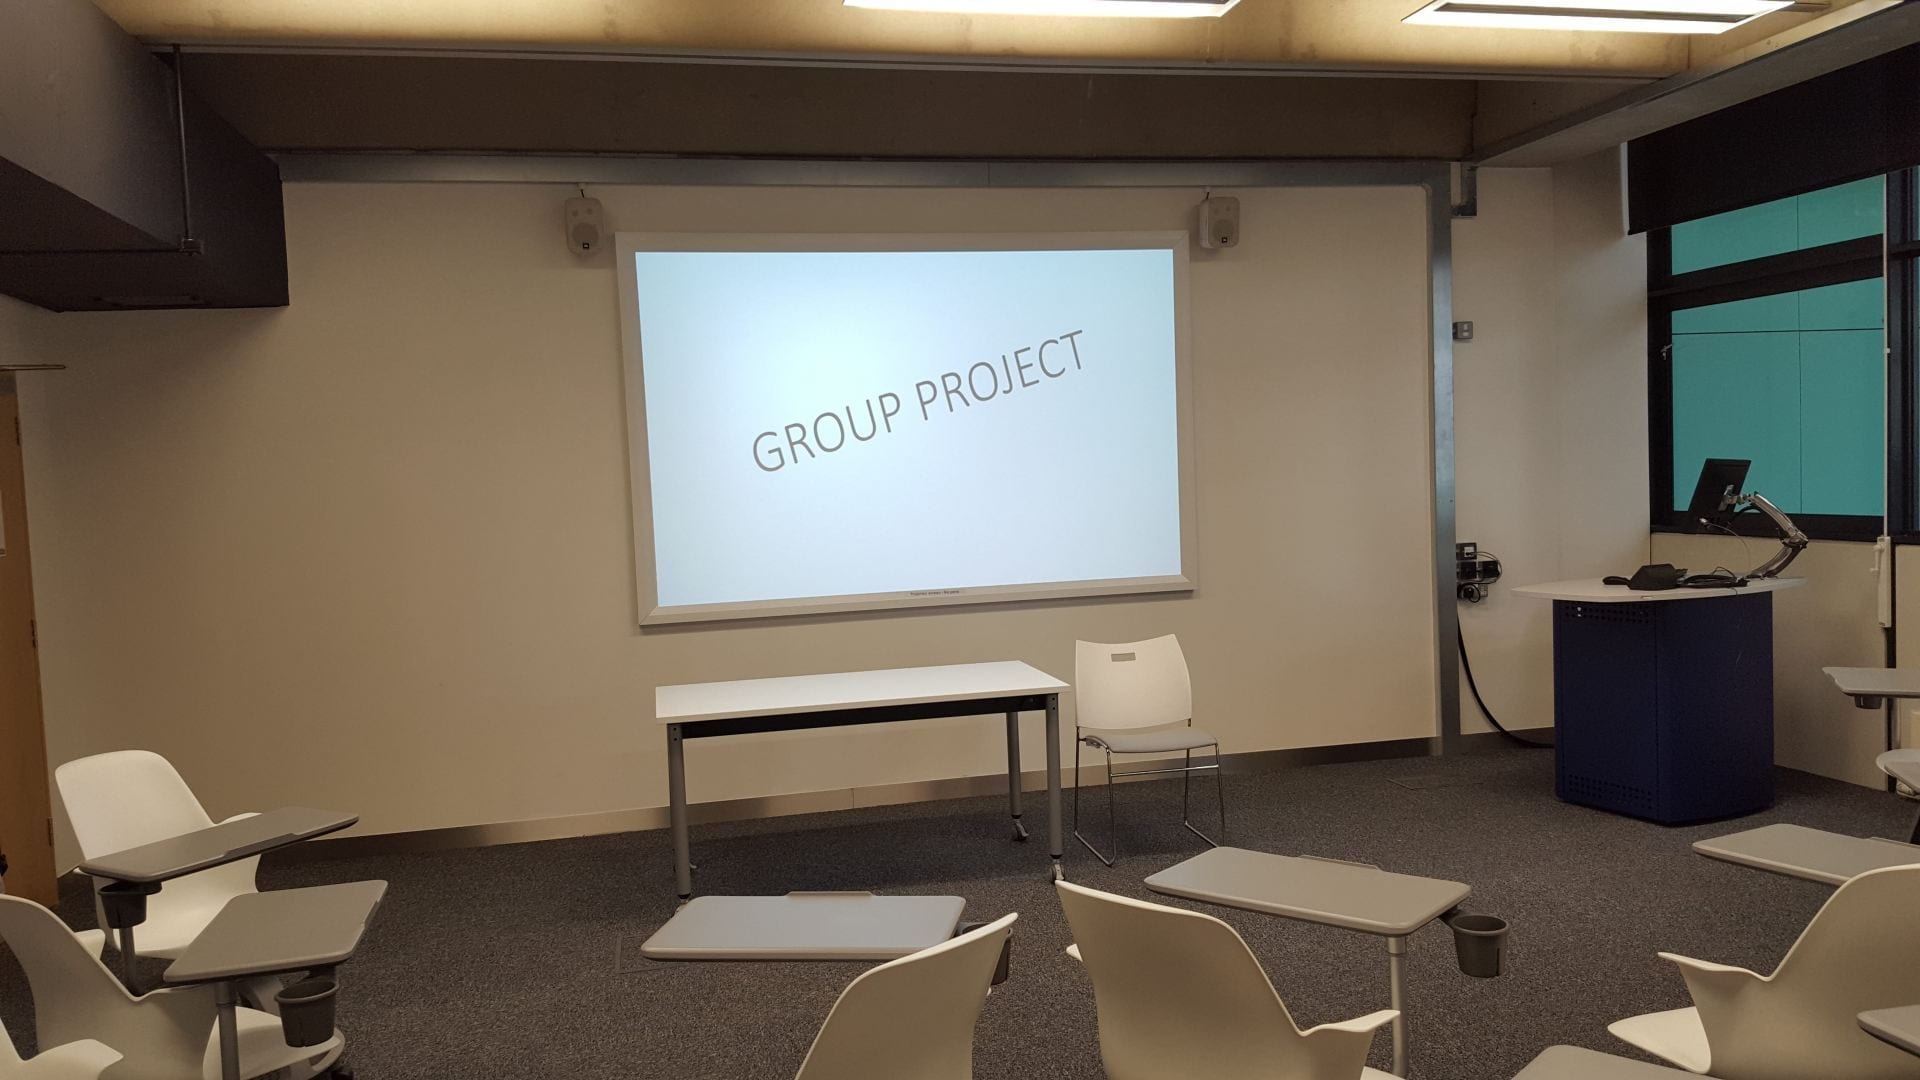 Large white board displaying Group Project in empty class room.